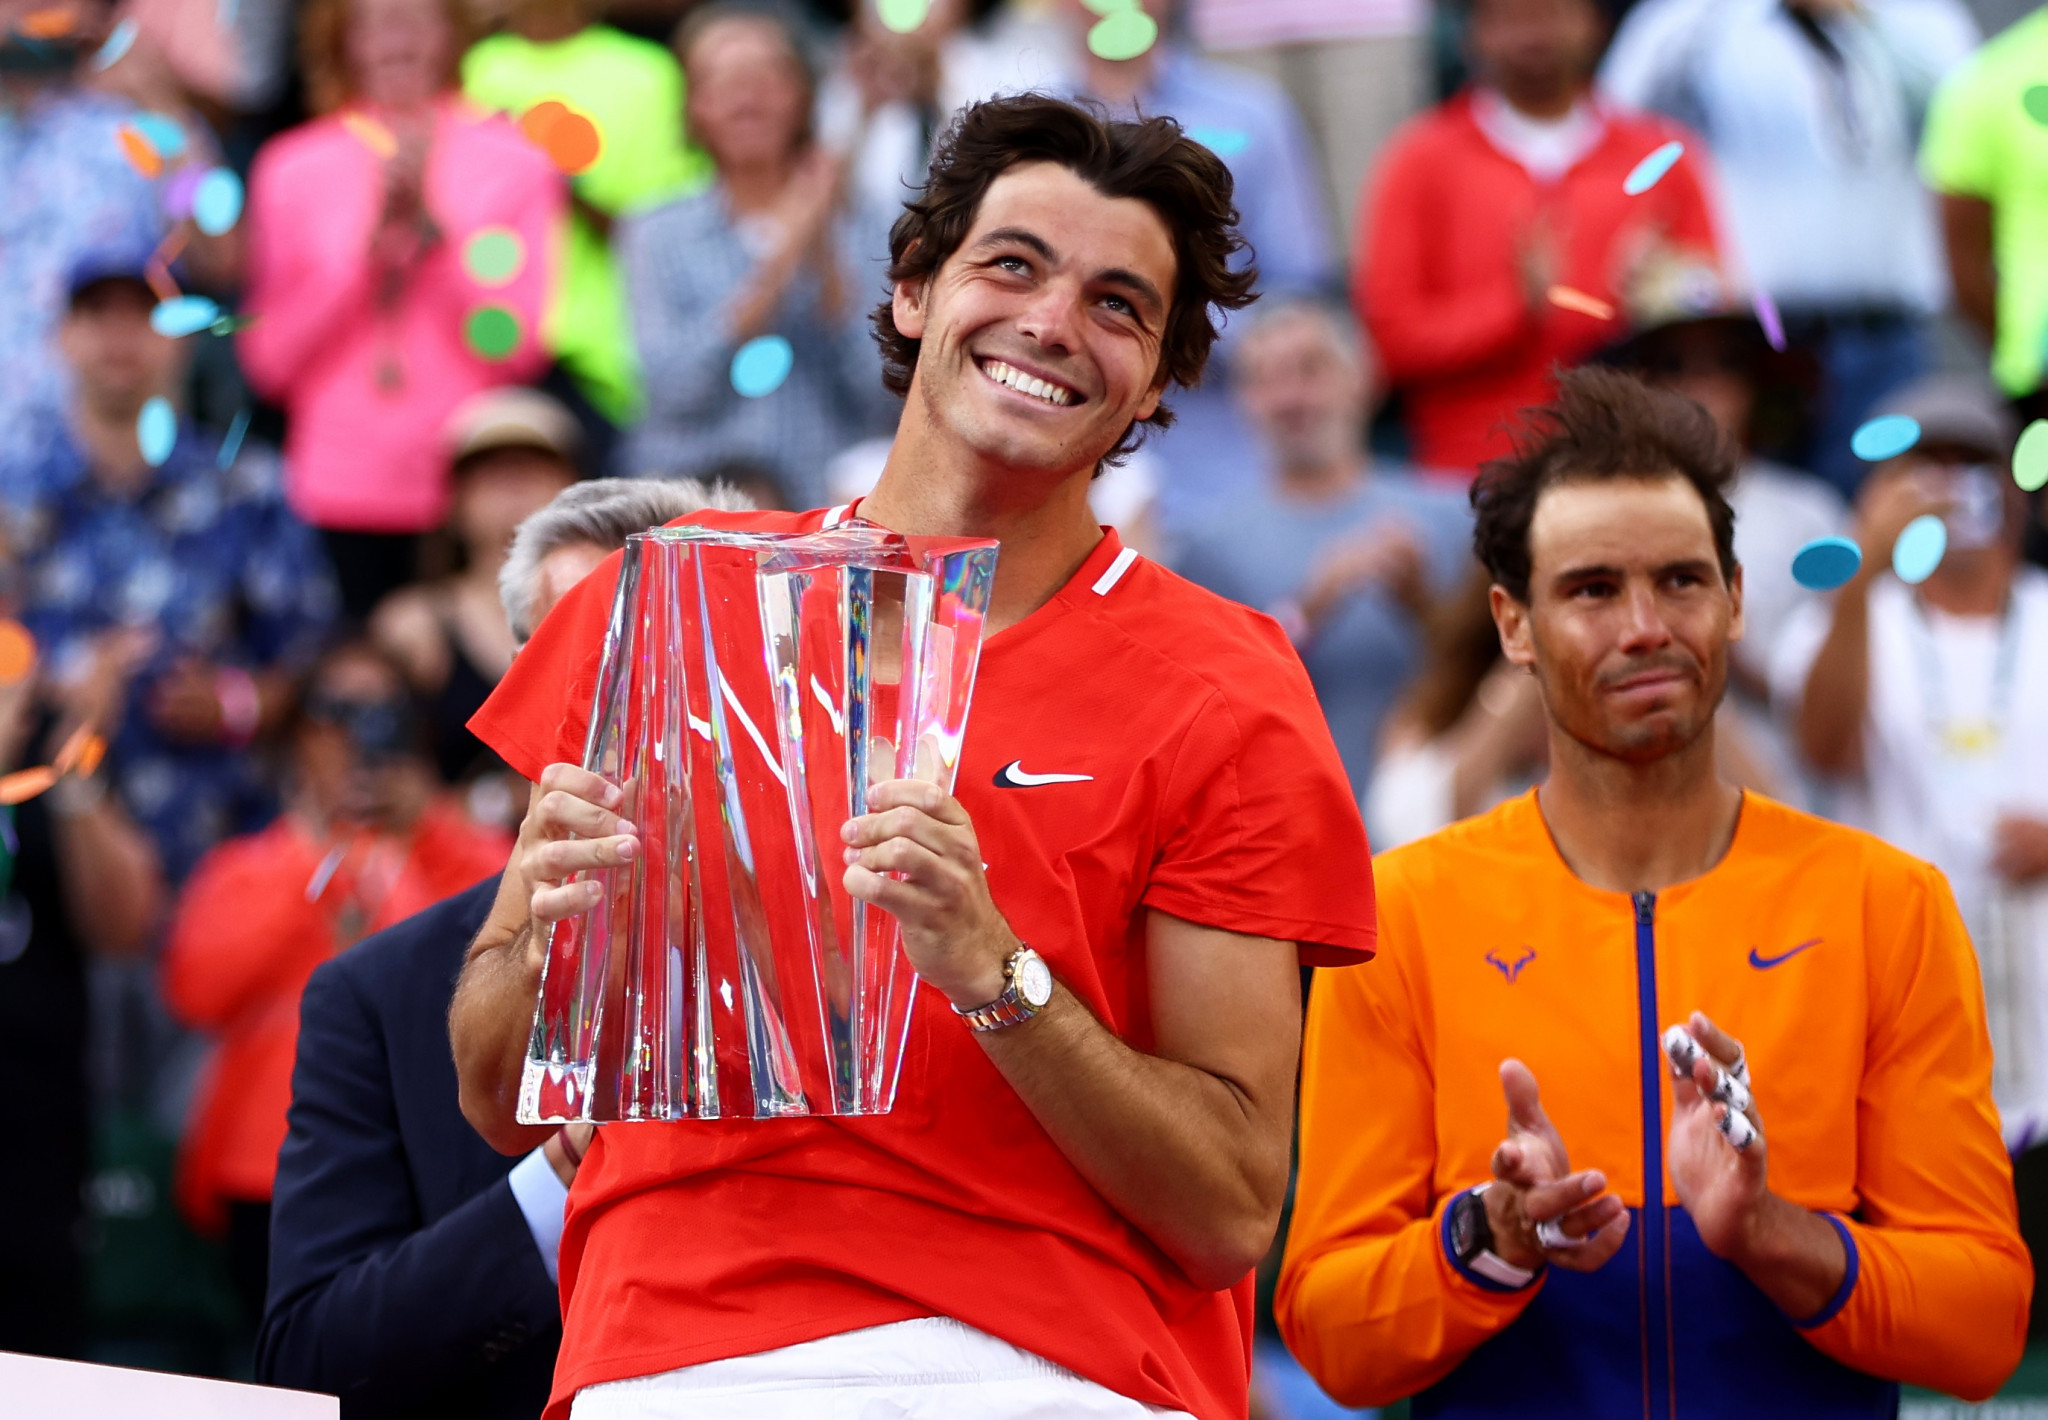 The United States' Taylor Fritz overcame an ankle injury to defeat Spain's Rafael Nadal in the men's singles final at Indian Wells ©Getty Images